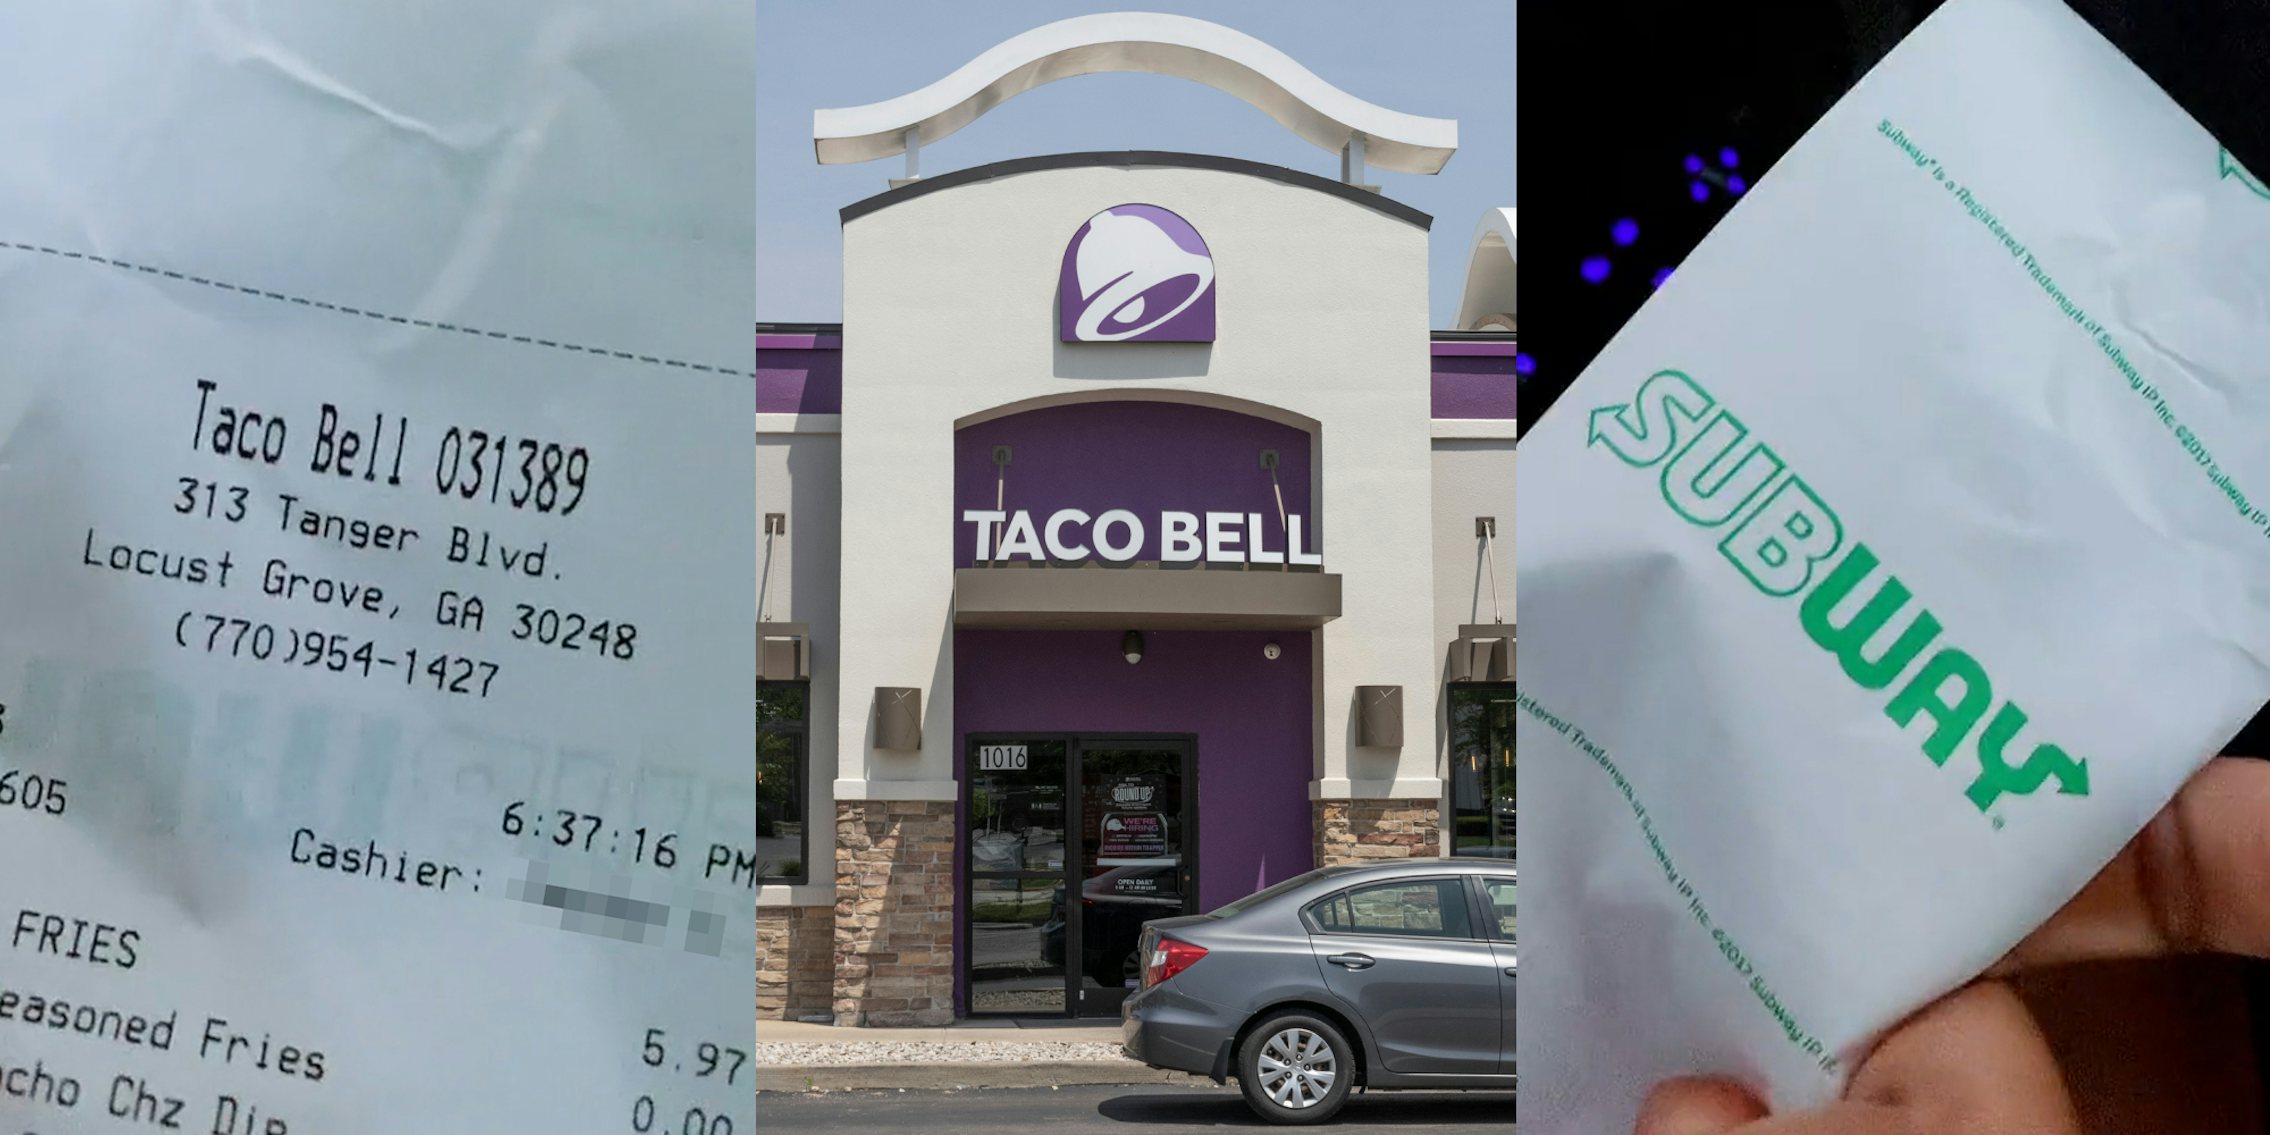 Taco Bell receipt (l) Taco Bell building with sign (c) back of Taco Bell receipt showing Subway logo (r)